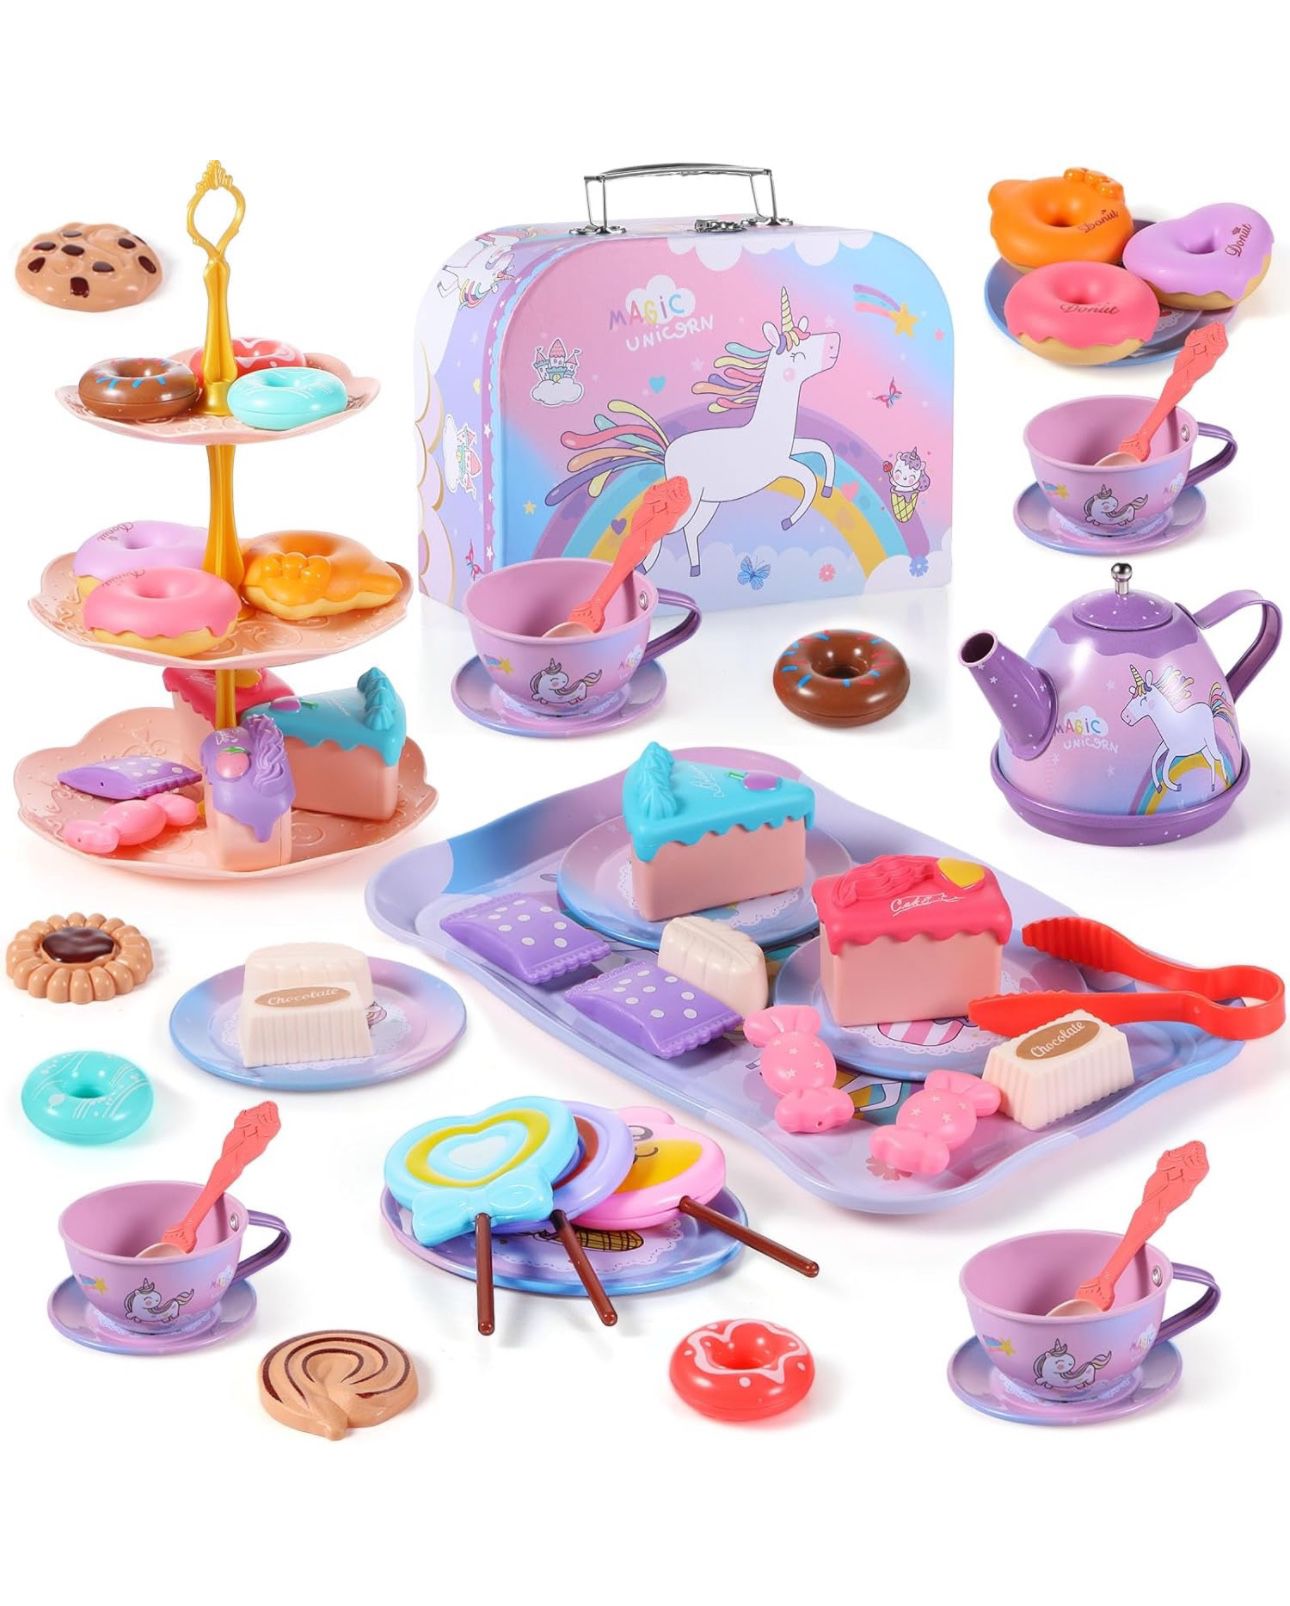 Pretend Tea Party Set for Girls, Princess Afternoon Tea Play Set, Beautiful Noble Gift for Age 3-6 Year Old, Toddler Toys Tea Party Set with Desserts 